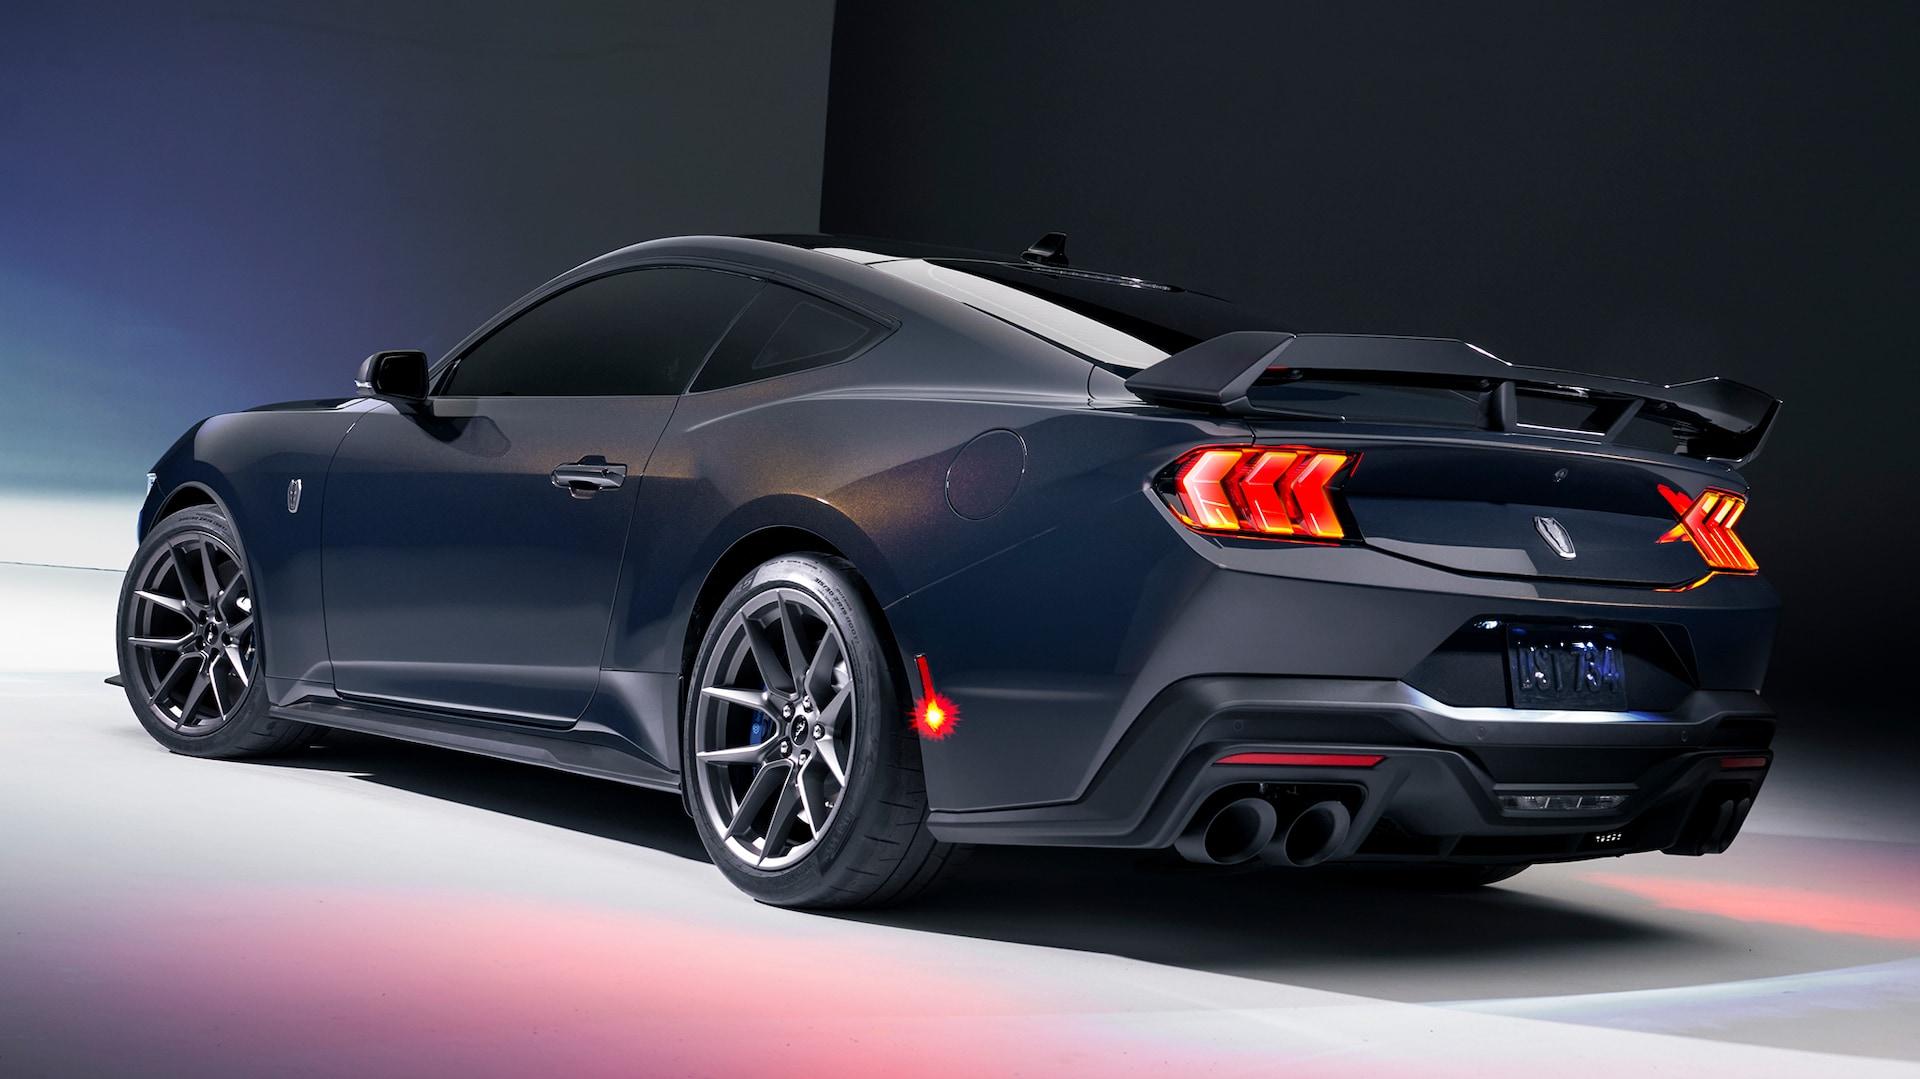 Exclusive Photos Of The Ford Mustang Gt And Dark Horse